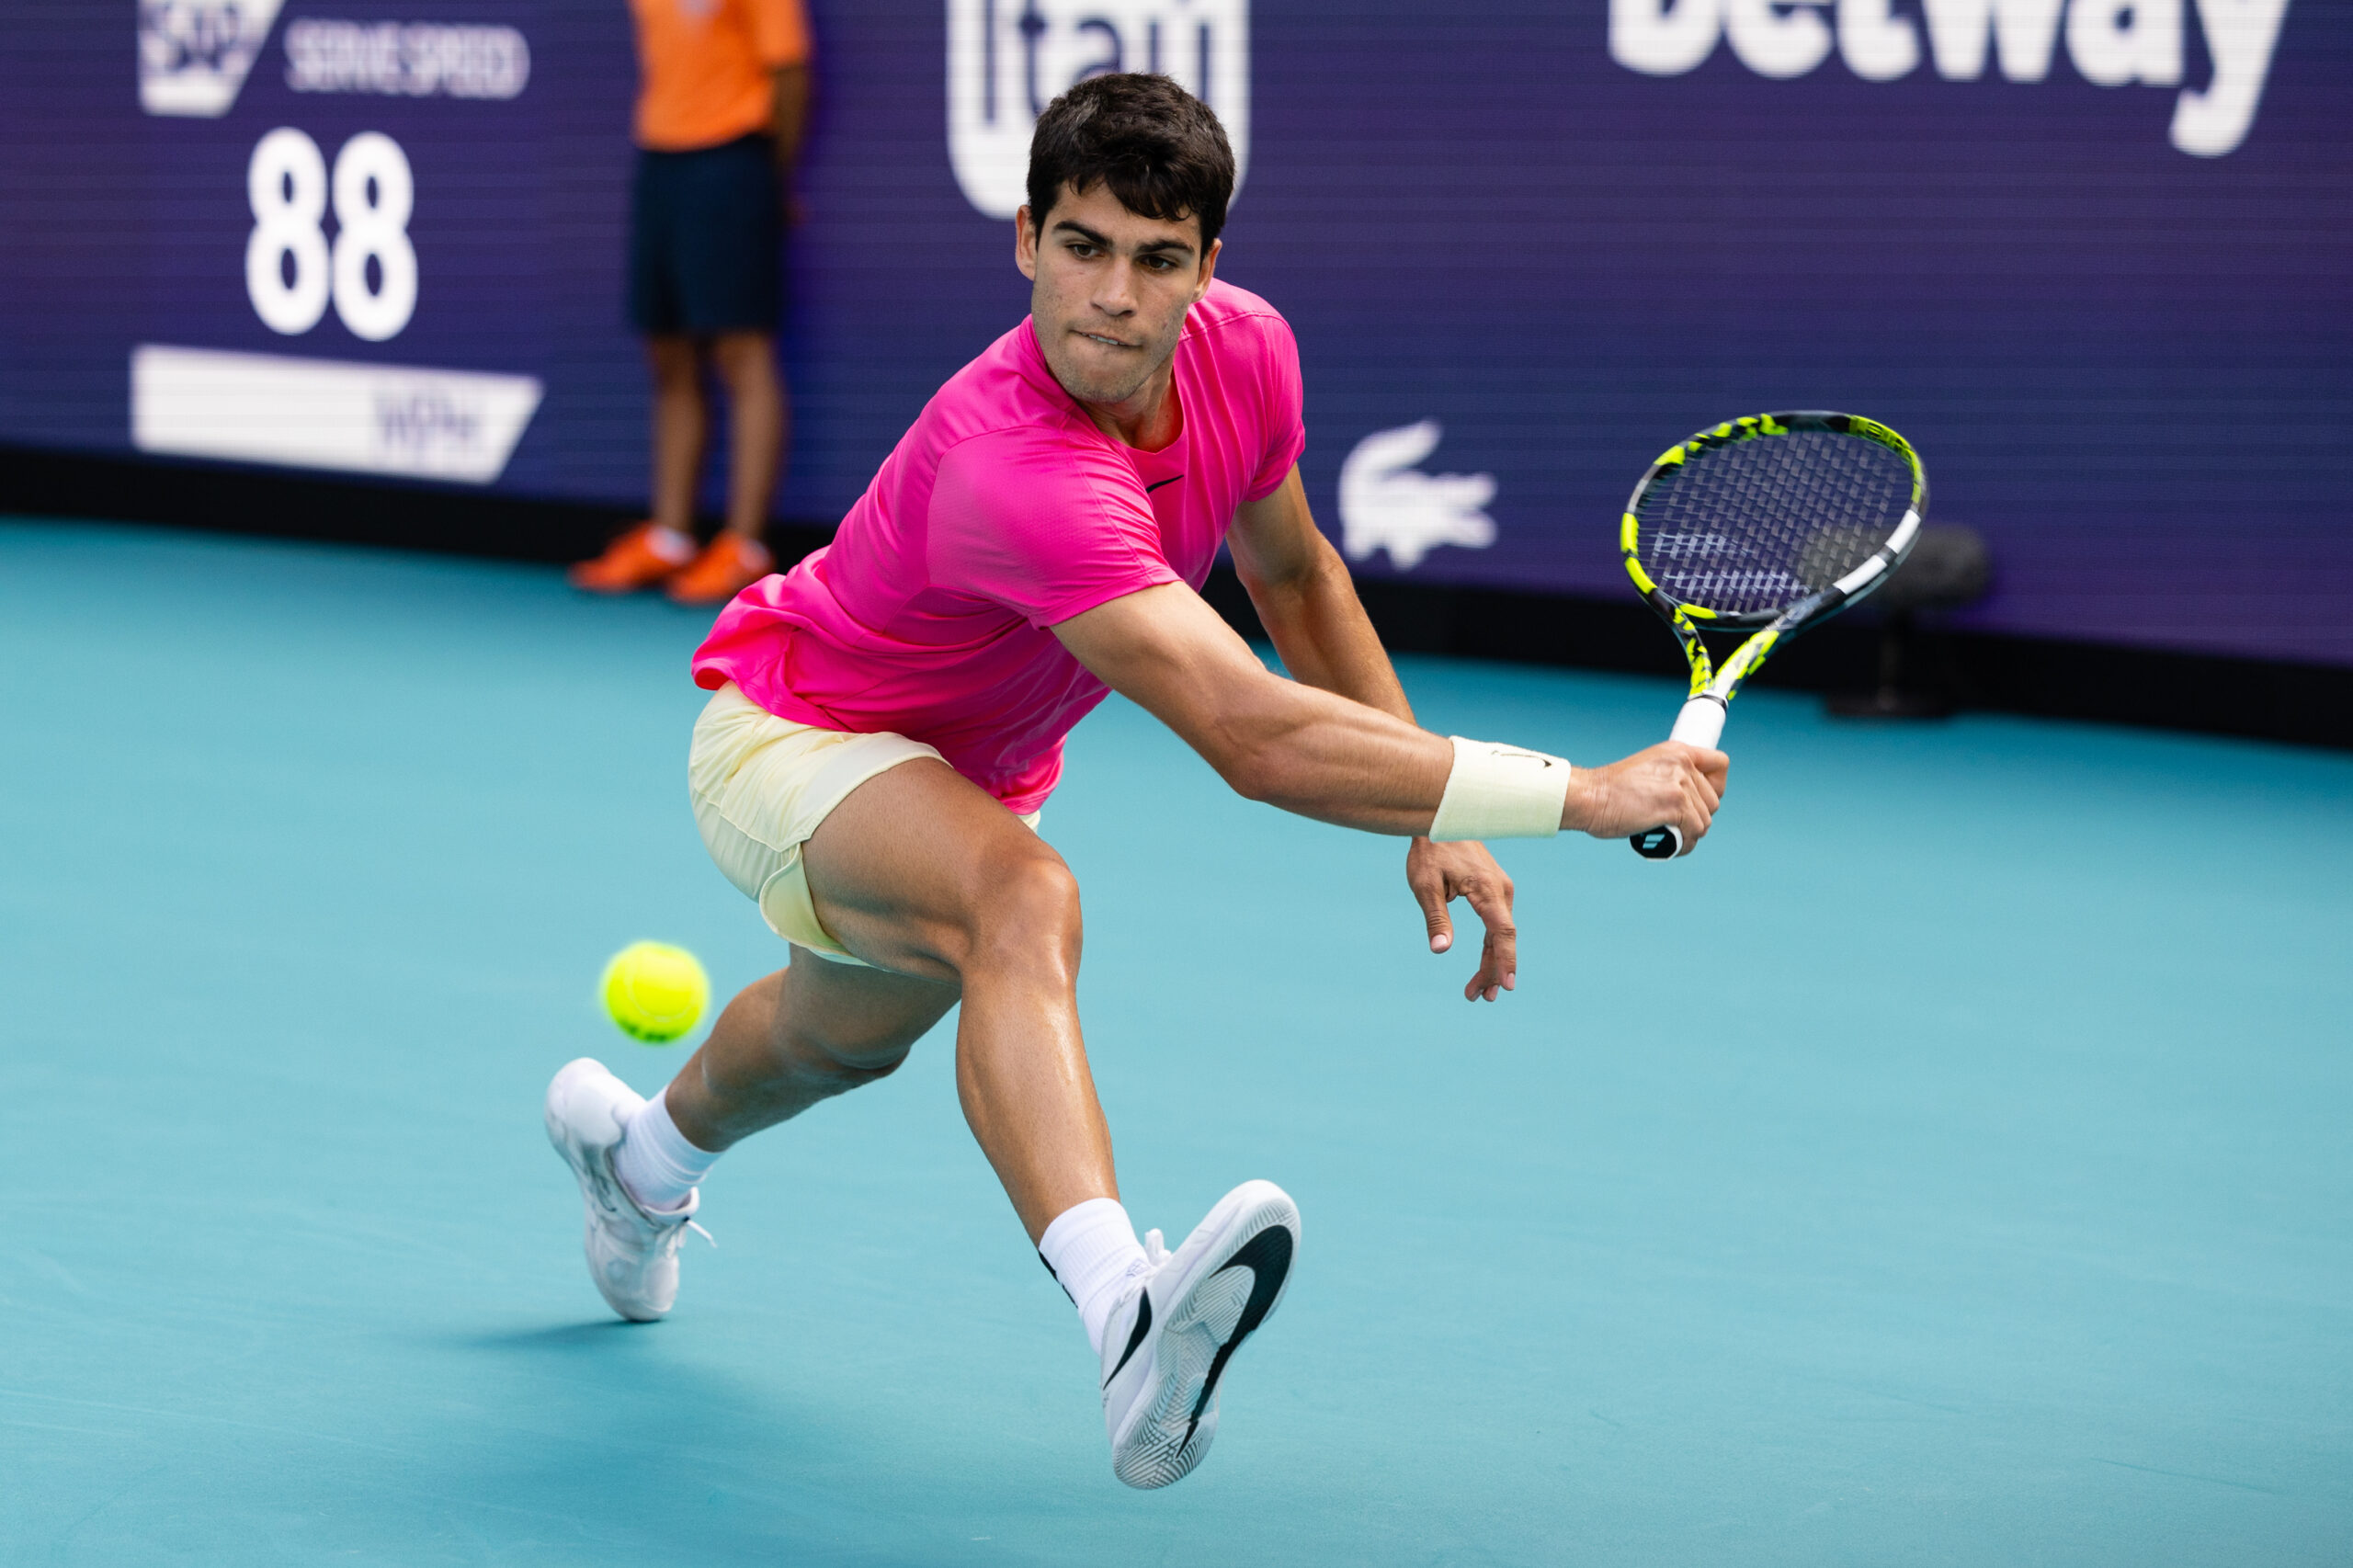 Carlos Alcaraz reaches down for a backhand slice during his match against Dusan Lajovic on March 26, 2023 at the Miami Open